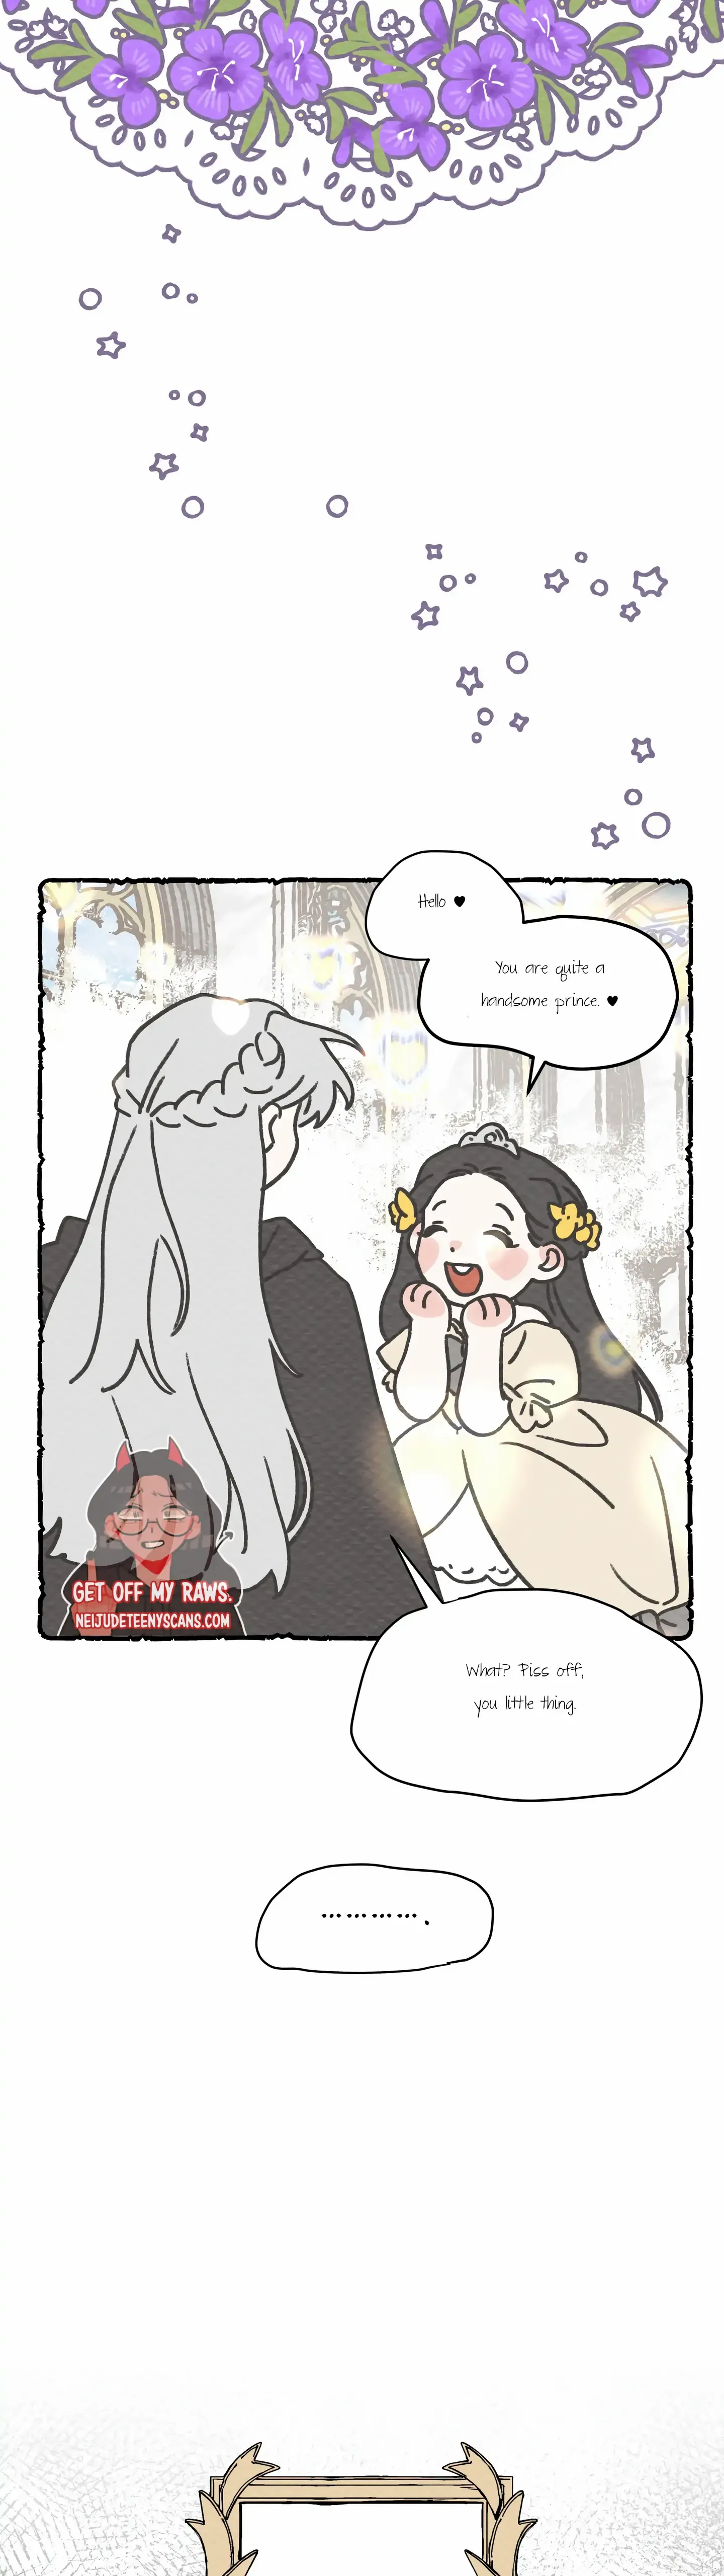 Prince Snow White Is Taken By The Queen - Page 3